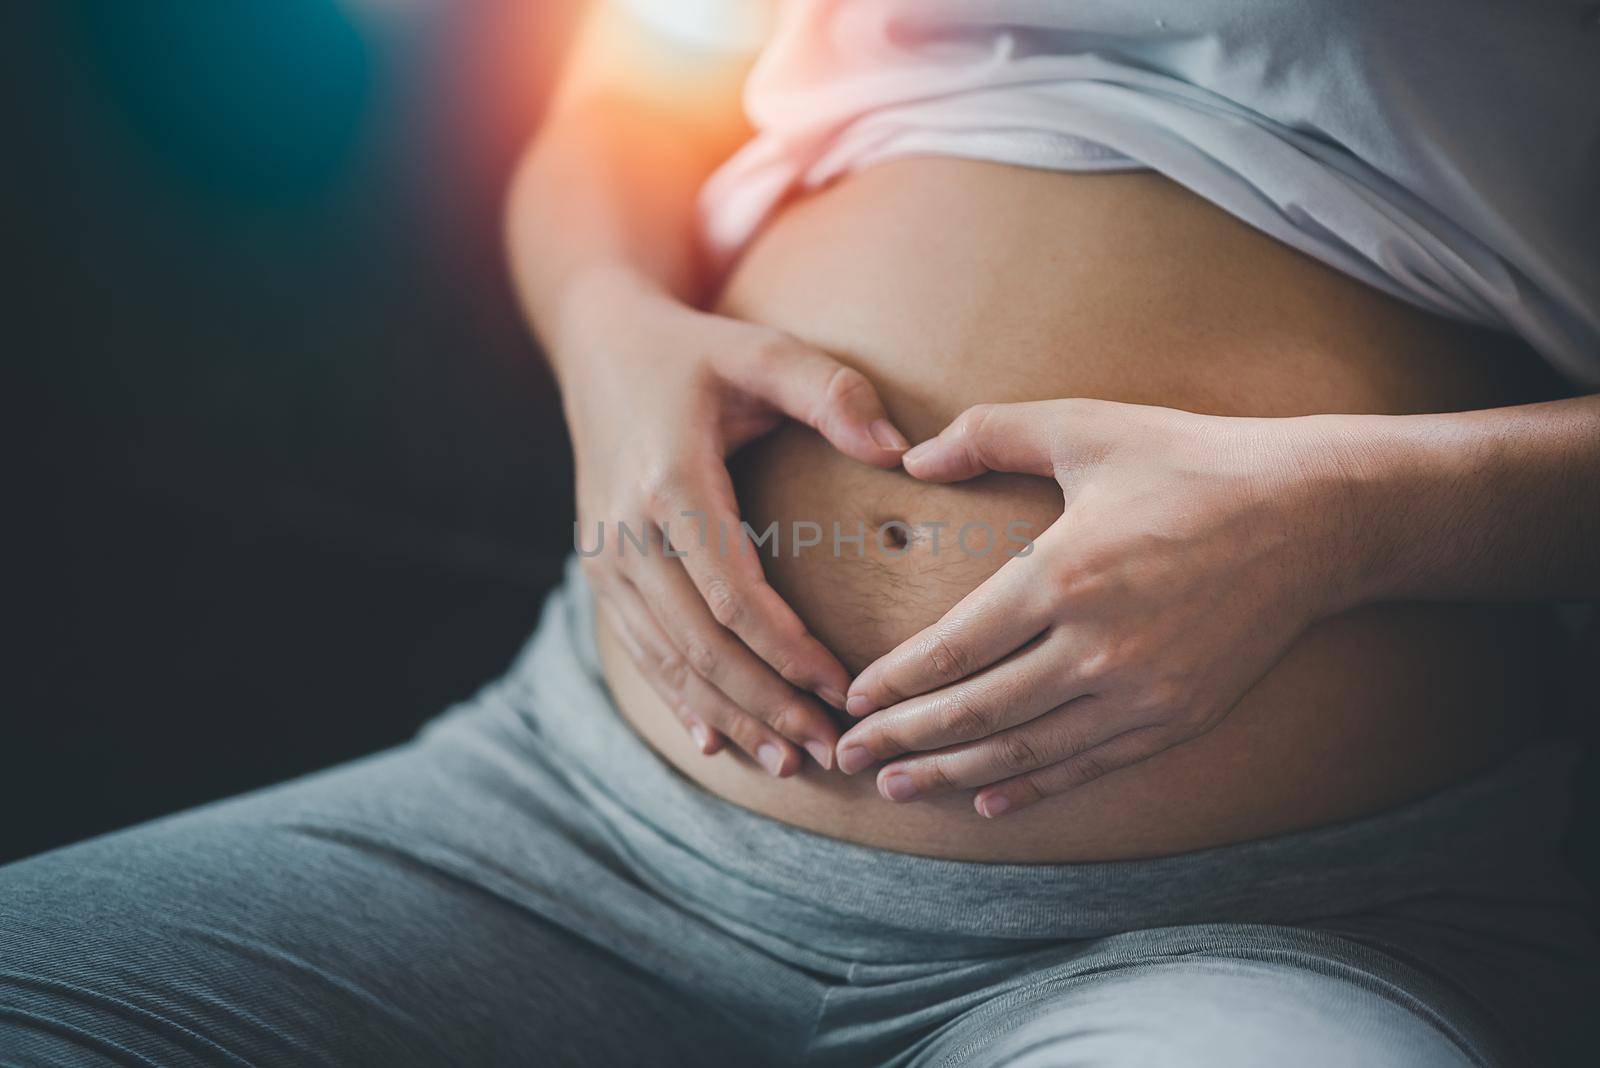 Pregnant woman holding hands in heart shape on belly at home.pregnant woman making heart with her hands, closeup. by Wmpix